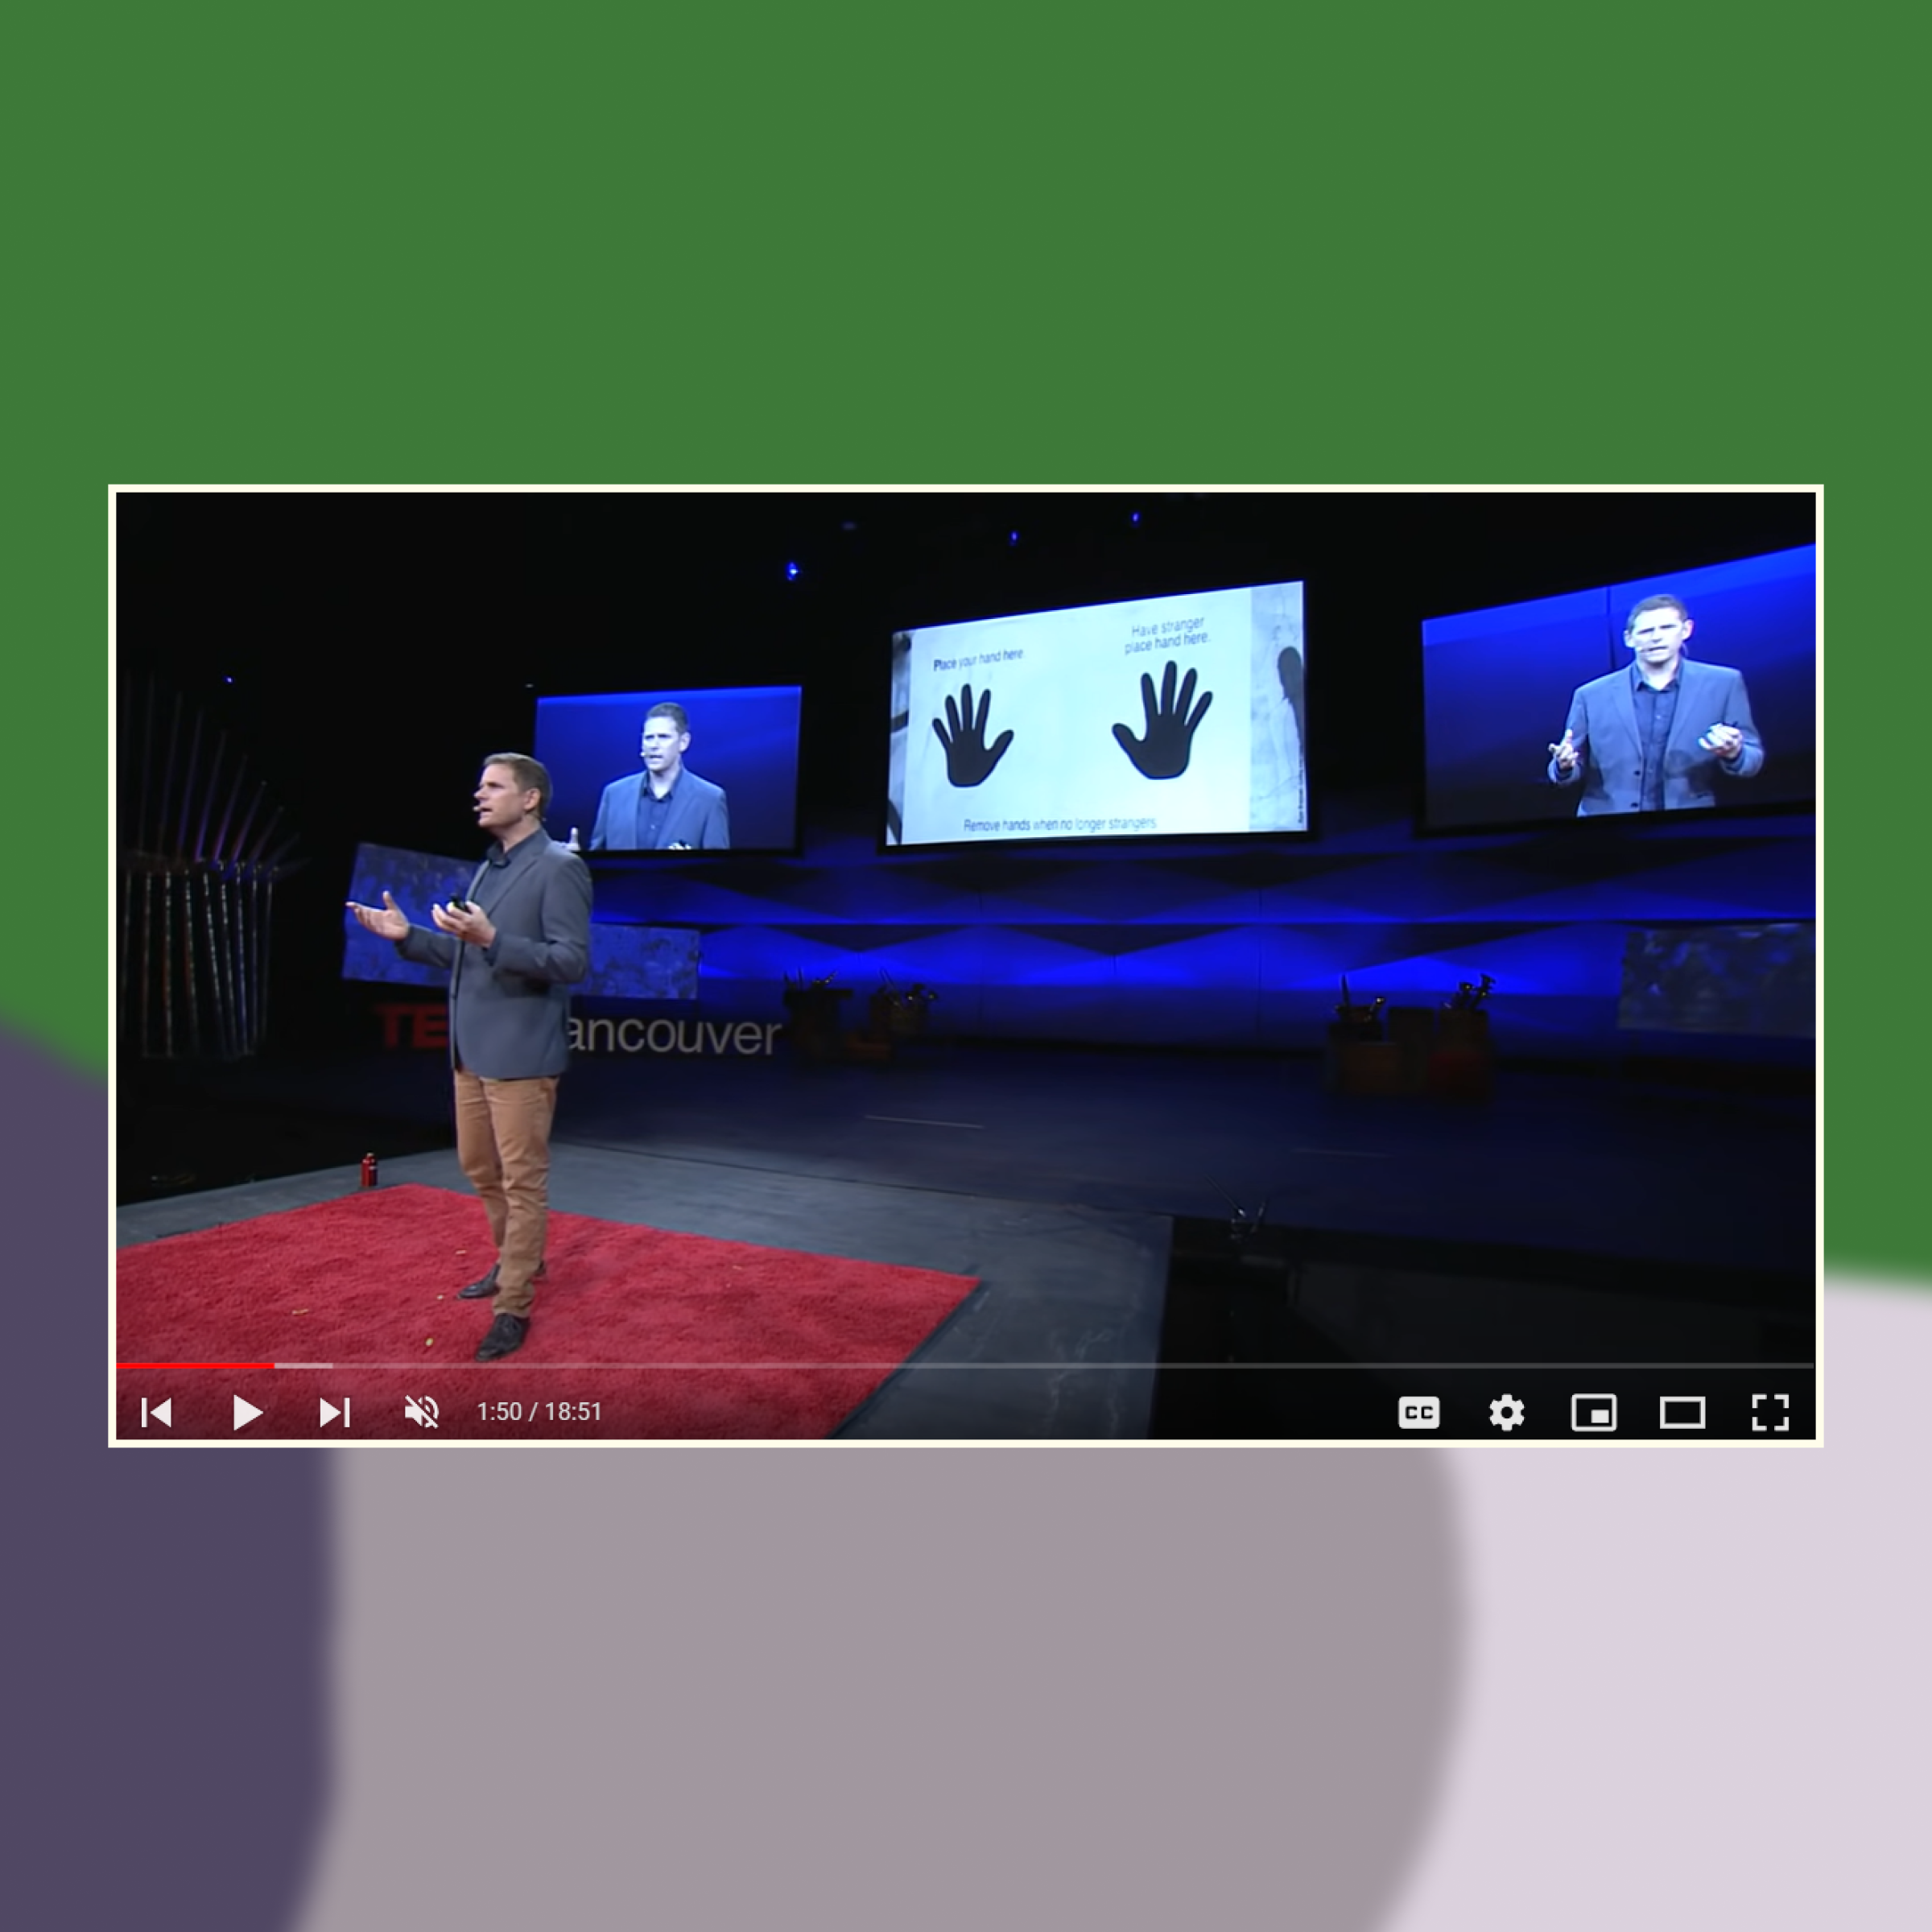 Screenshot of Charles Montgomery’s talk against an abstract painted background